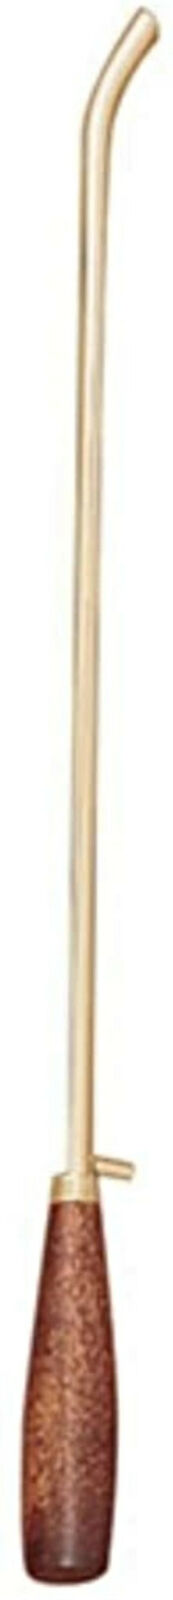 Solid Brass Candlelighter With Walnut Stained Wooden Handle, 18 Inch N.G.